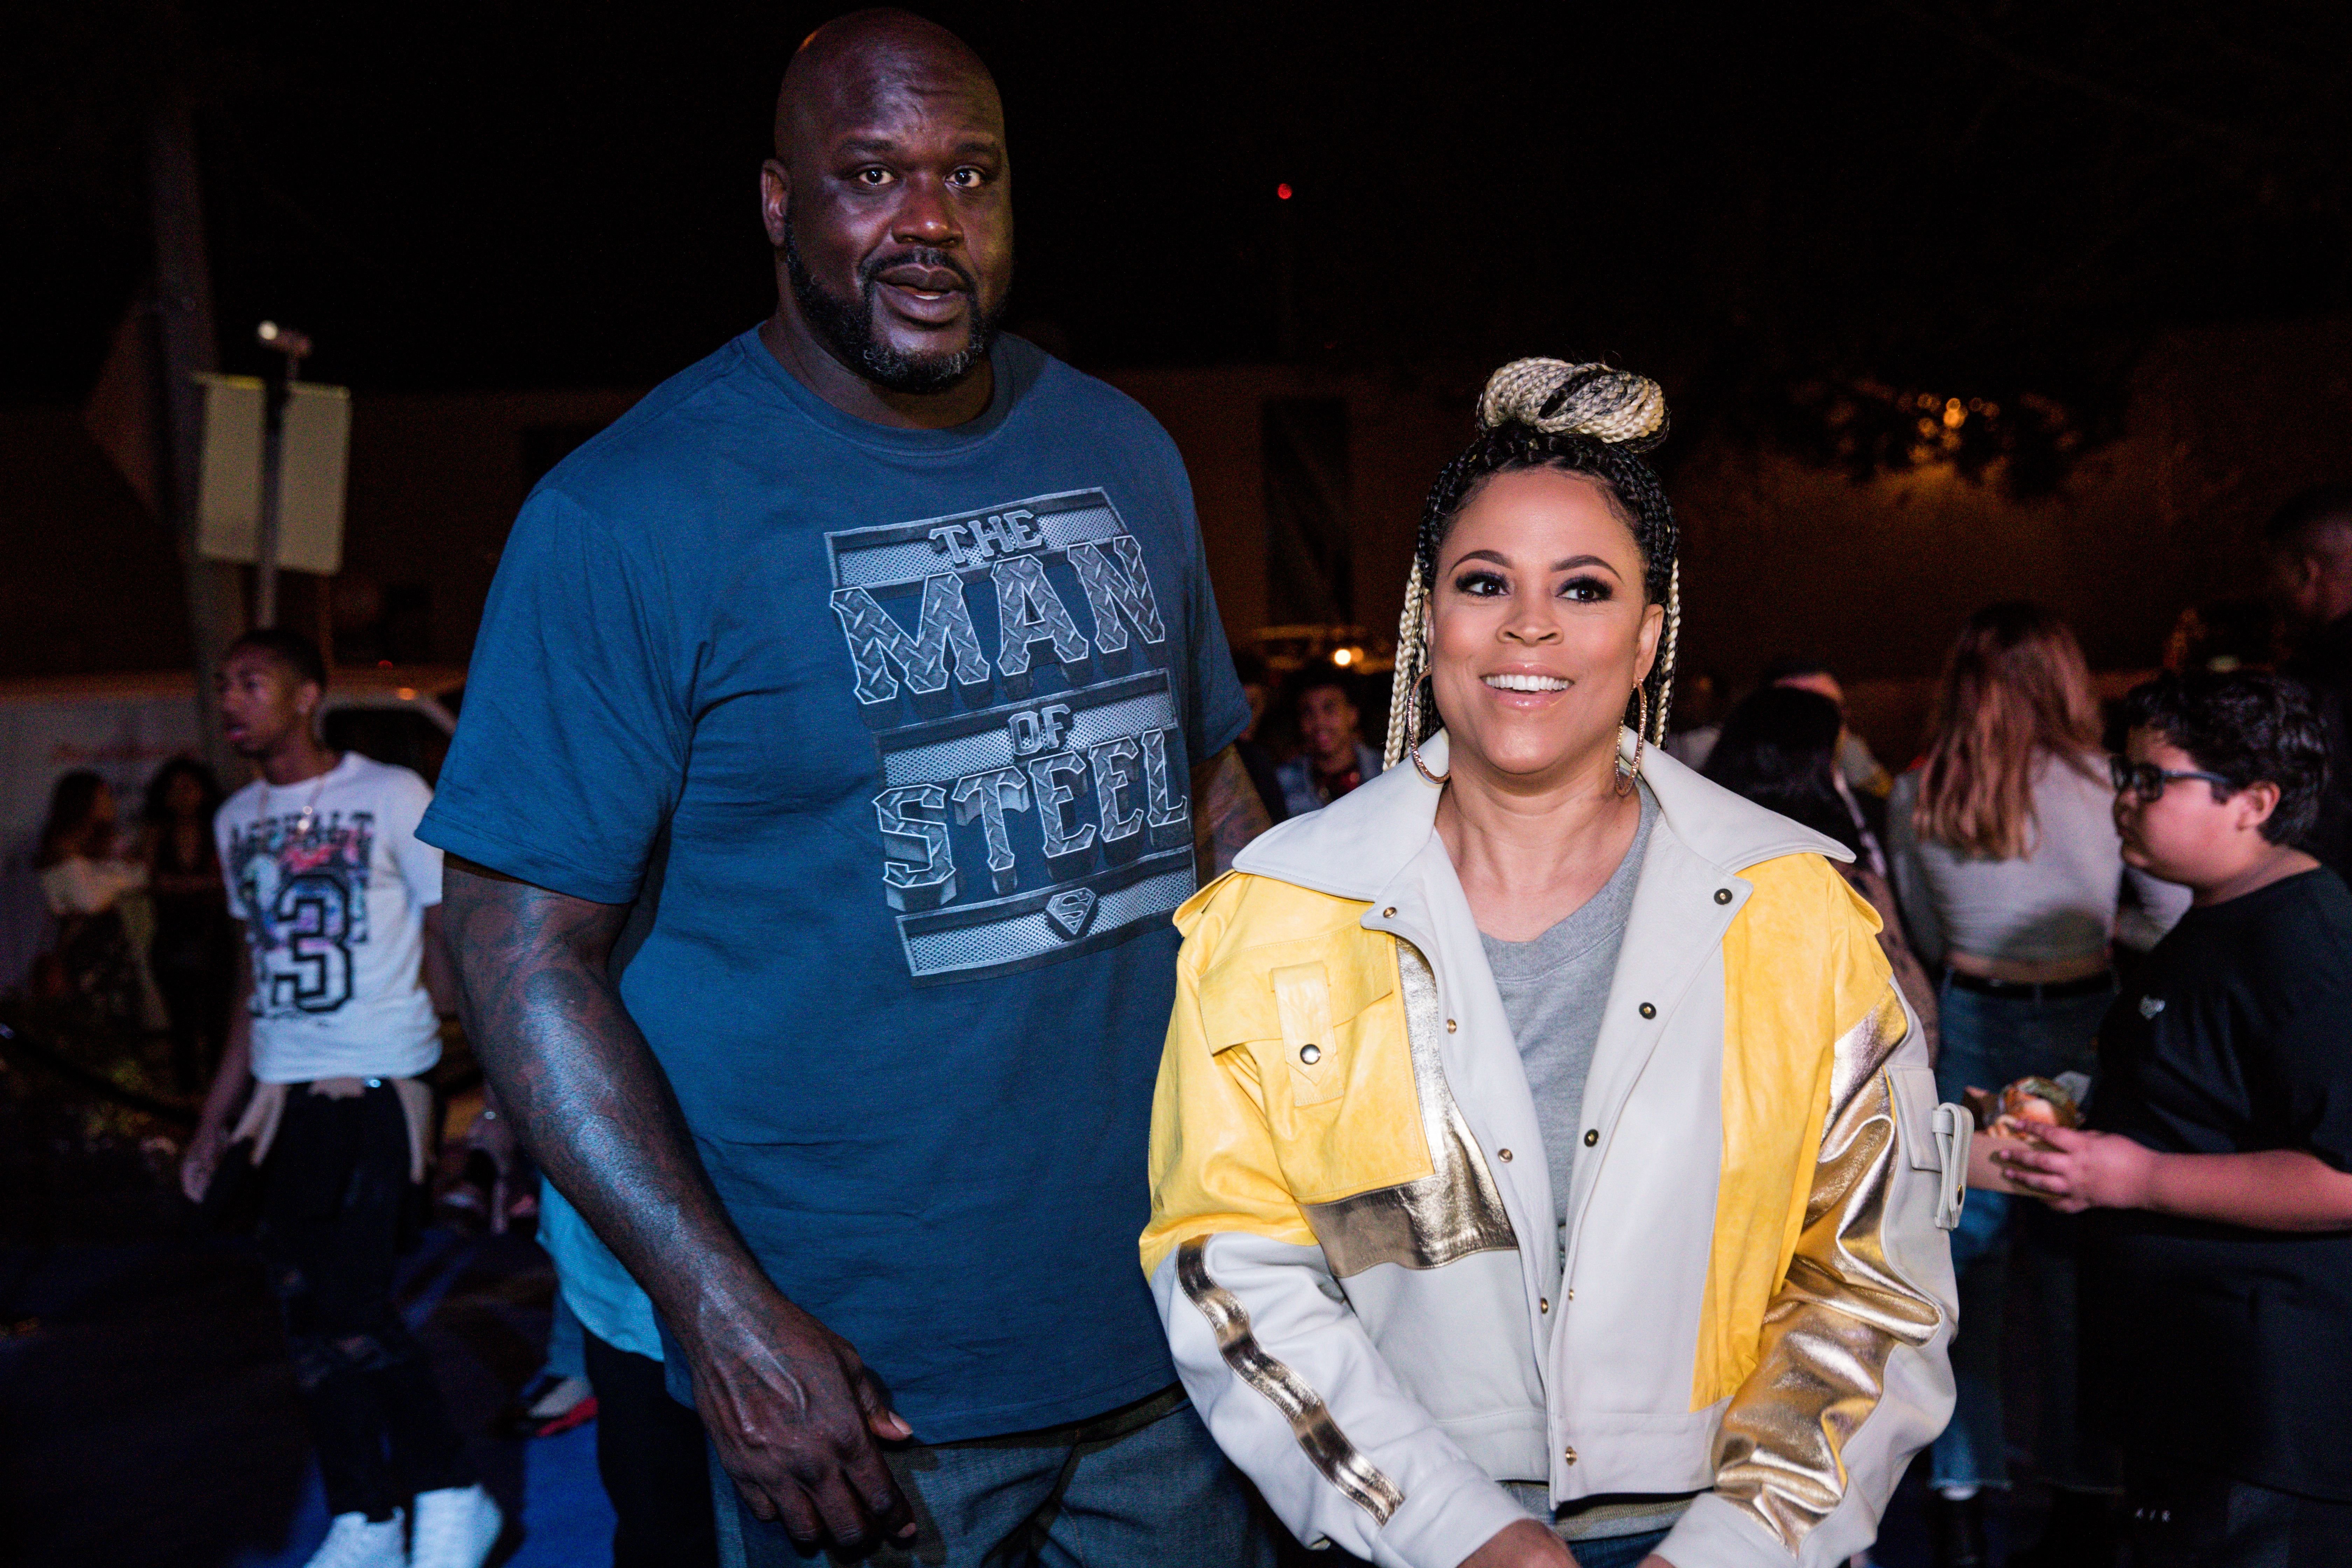 Shaunie O'Neal and Shaquille O'Neal celebrate Shareef O'Neal's 18th birthday at West Coast Customs on January 13, 2018 | Photo: Getty Images